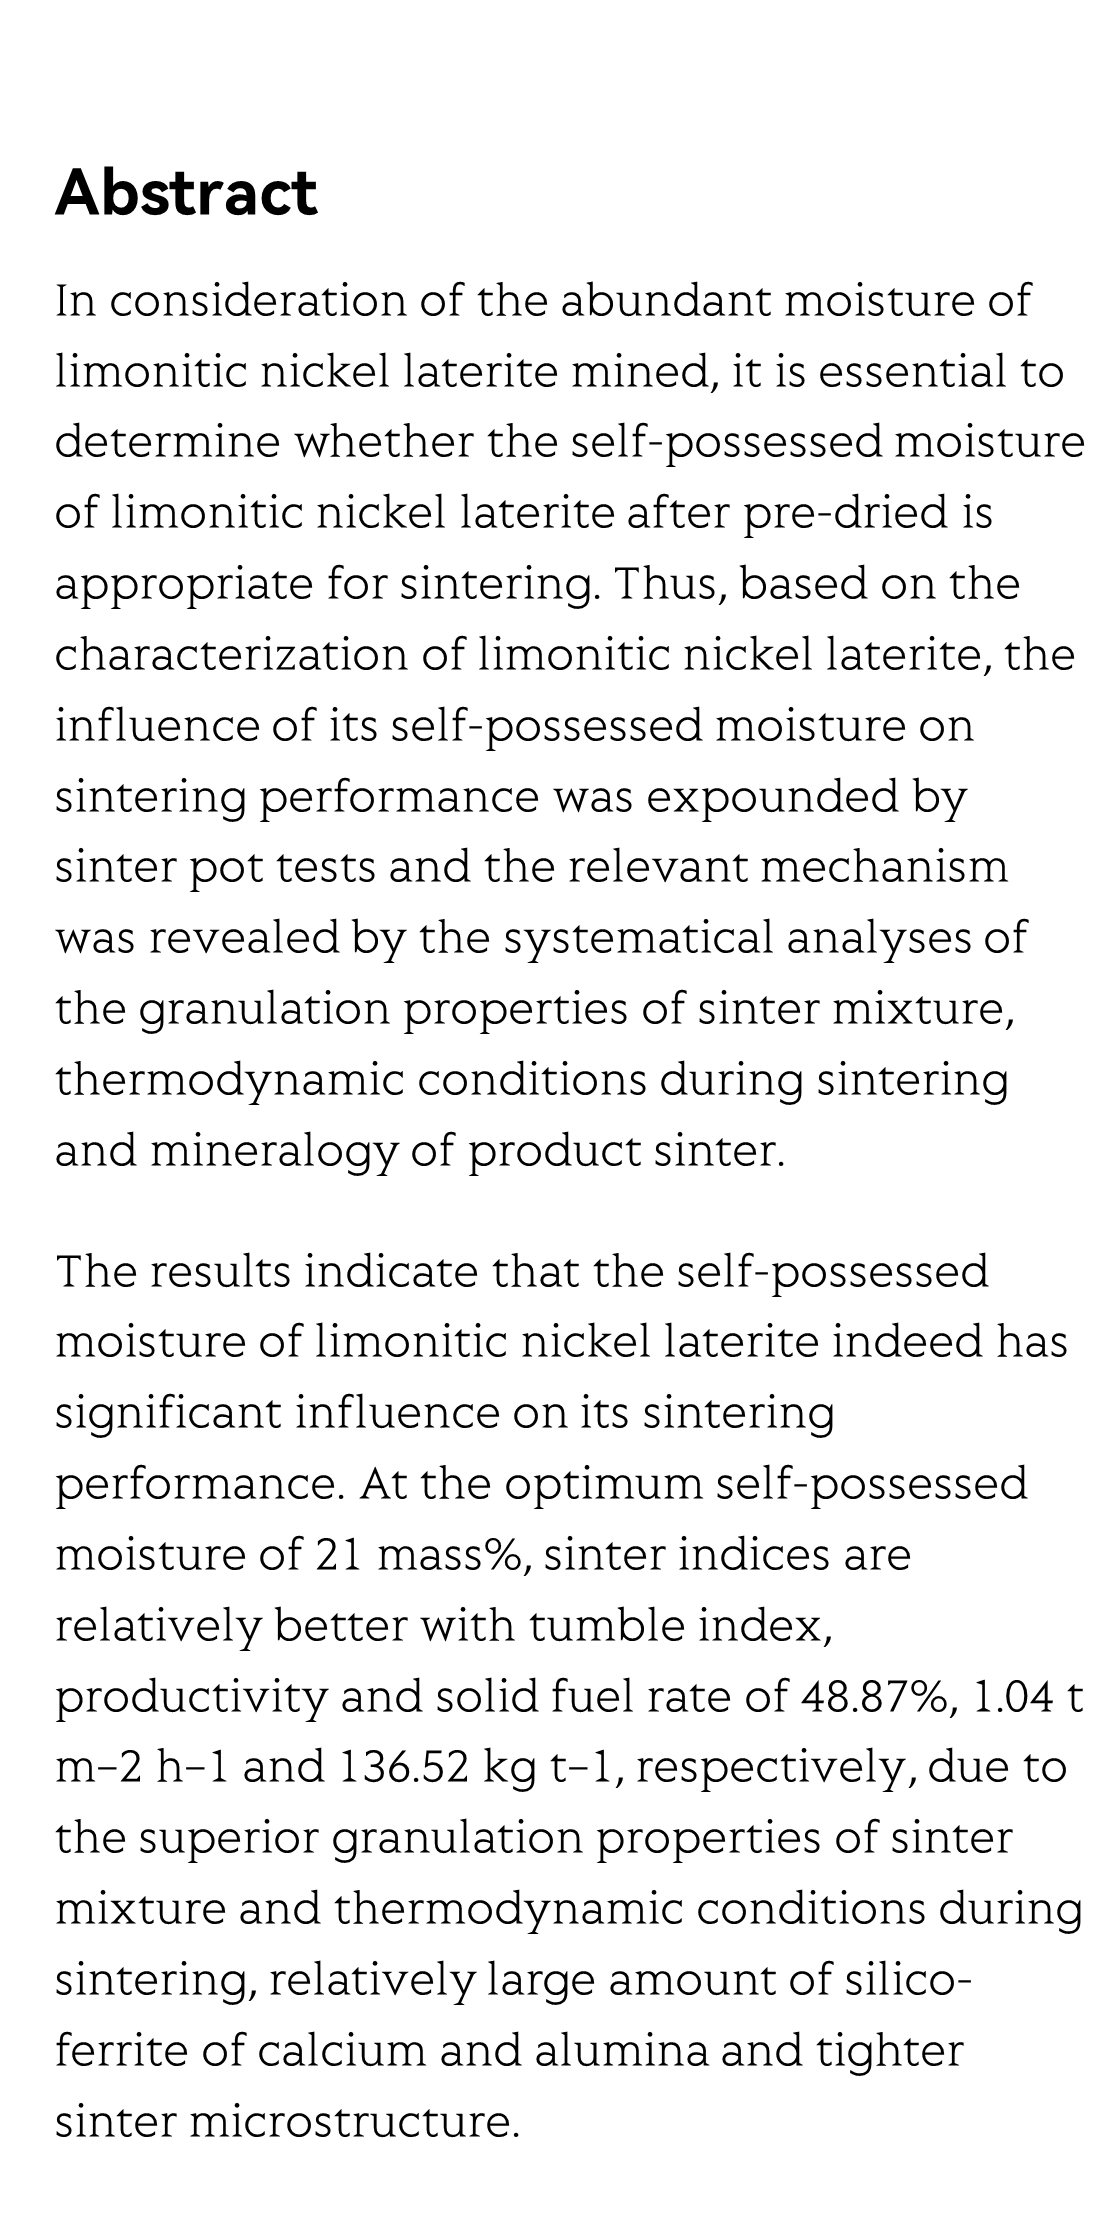 Significant influence of self-possessed moisture of limonitic nickel laterite on sintering performance and its action mechanism_2